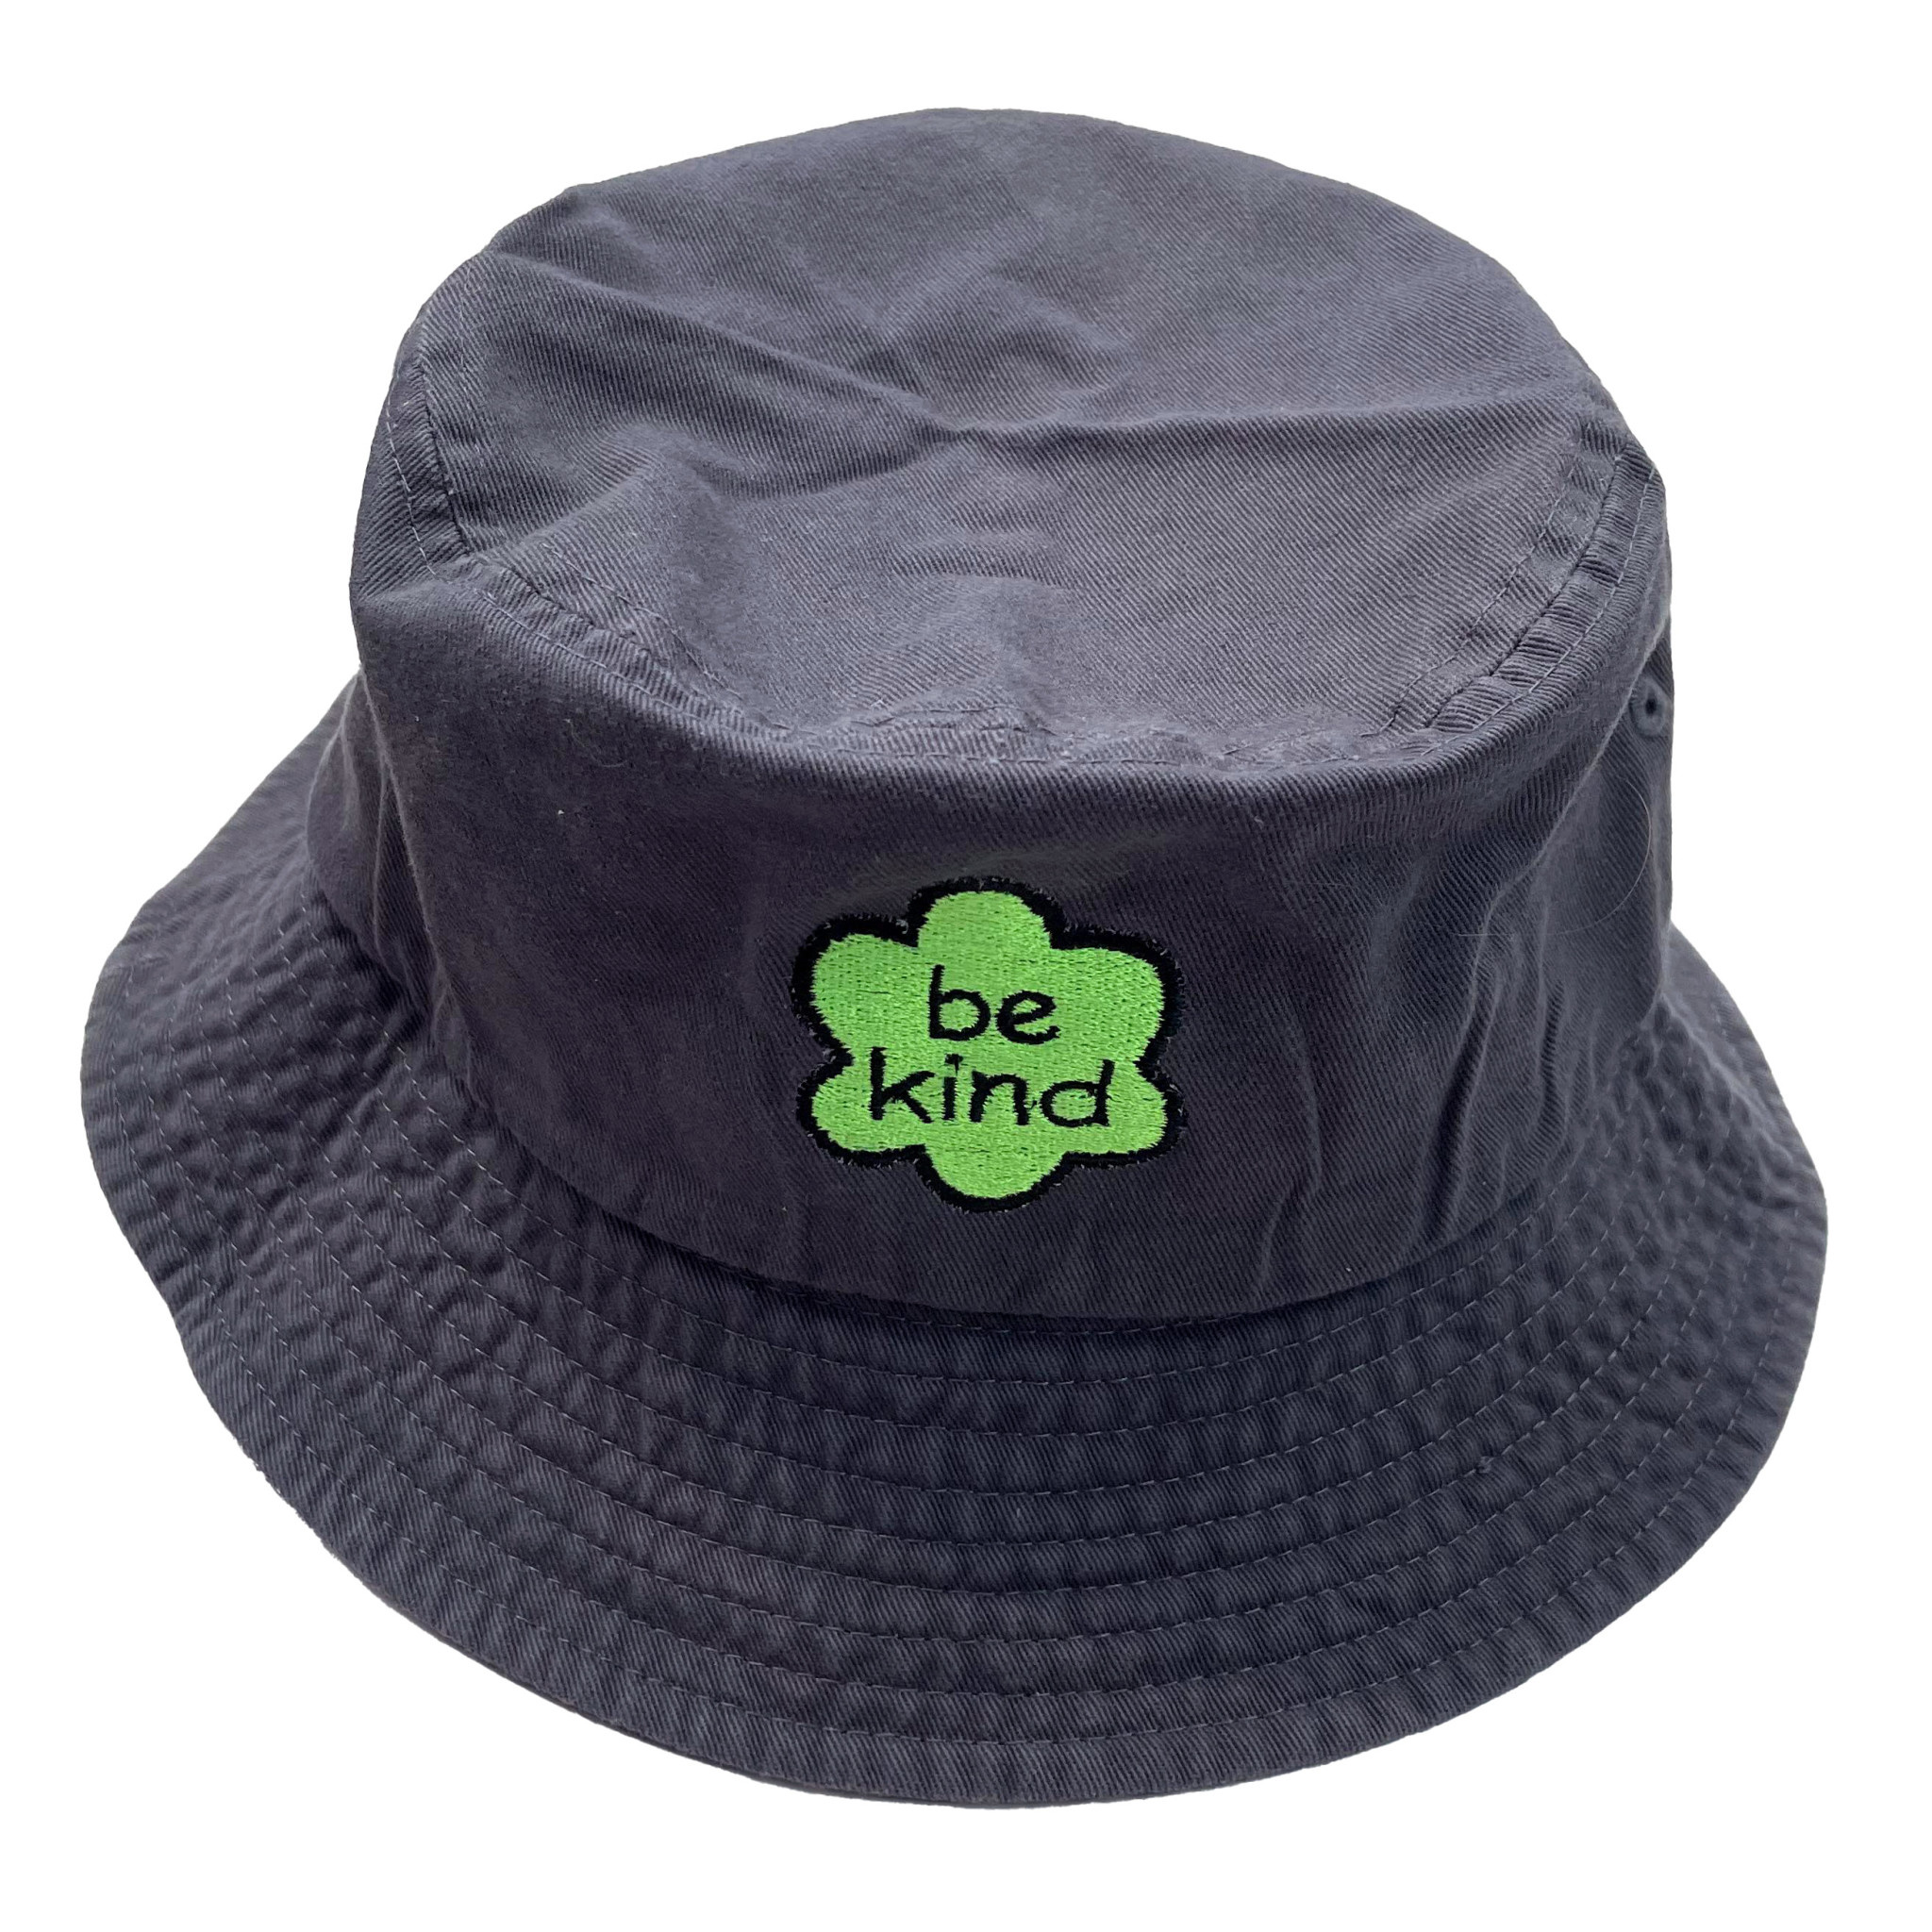 Kind Stitches Bucket Hat - Charcoal with Embroidered Green Flower